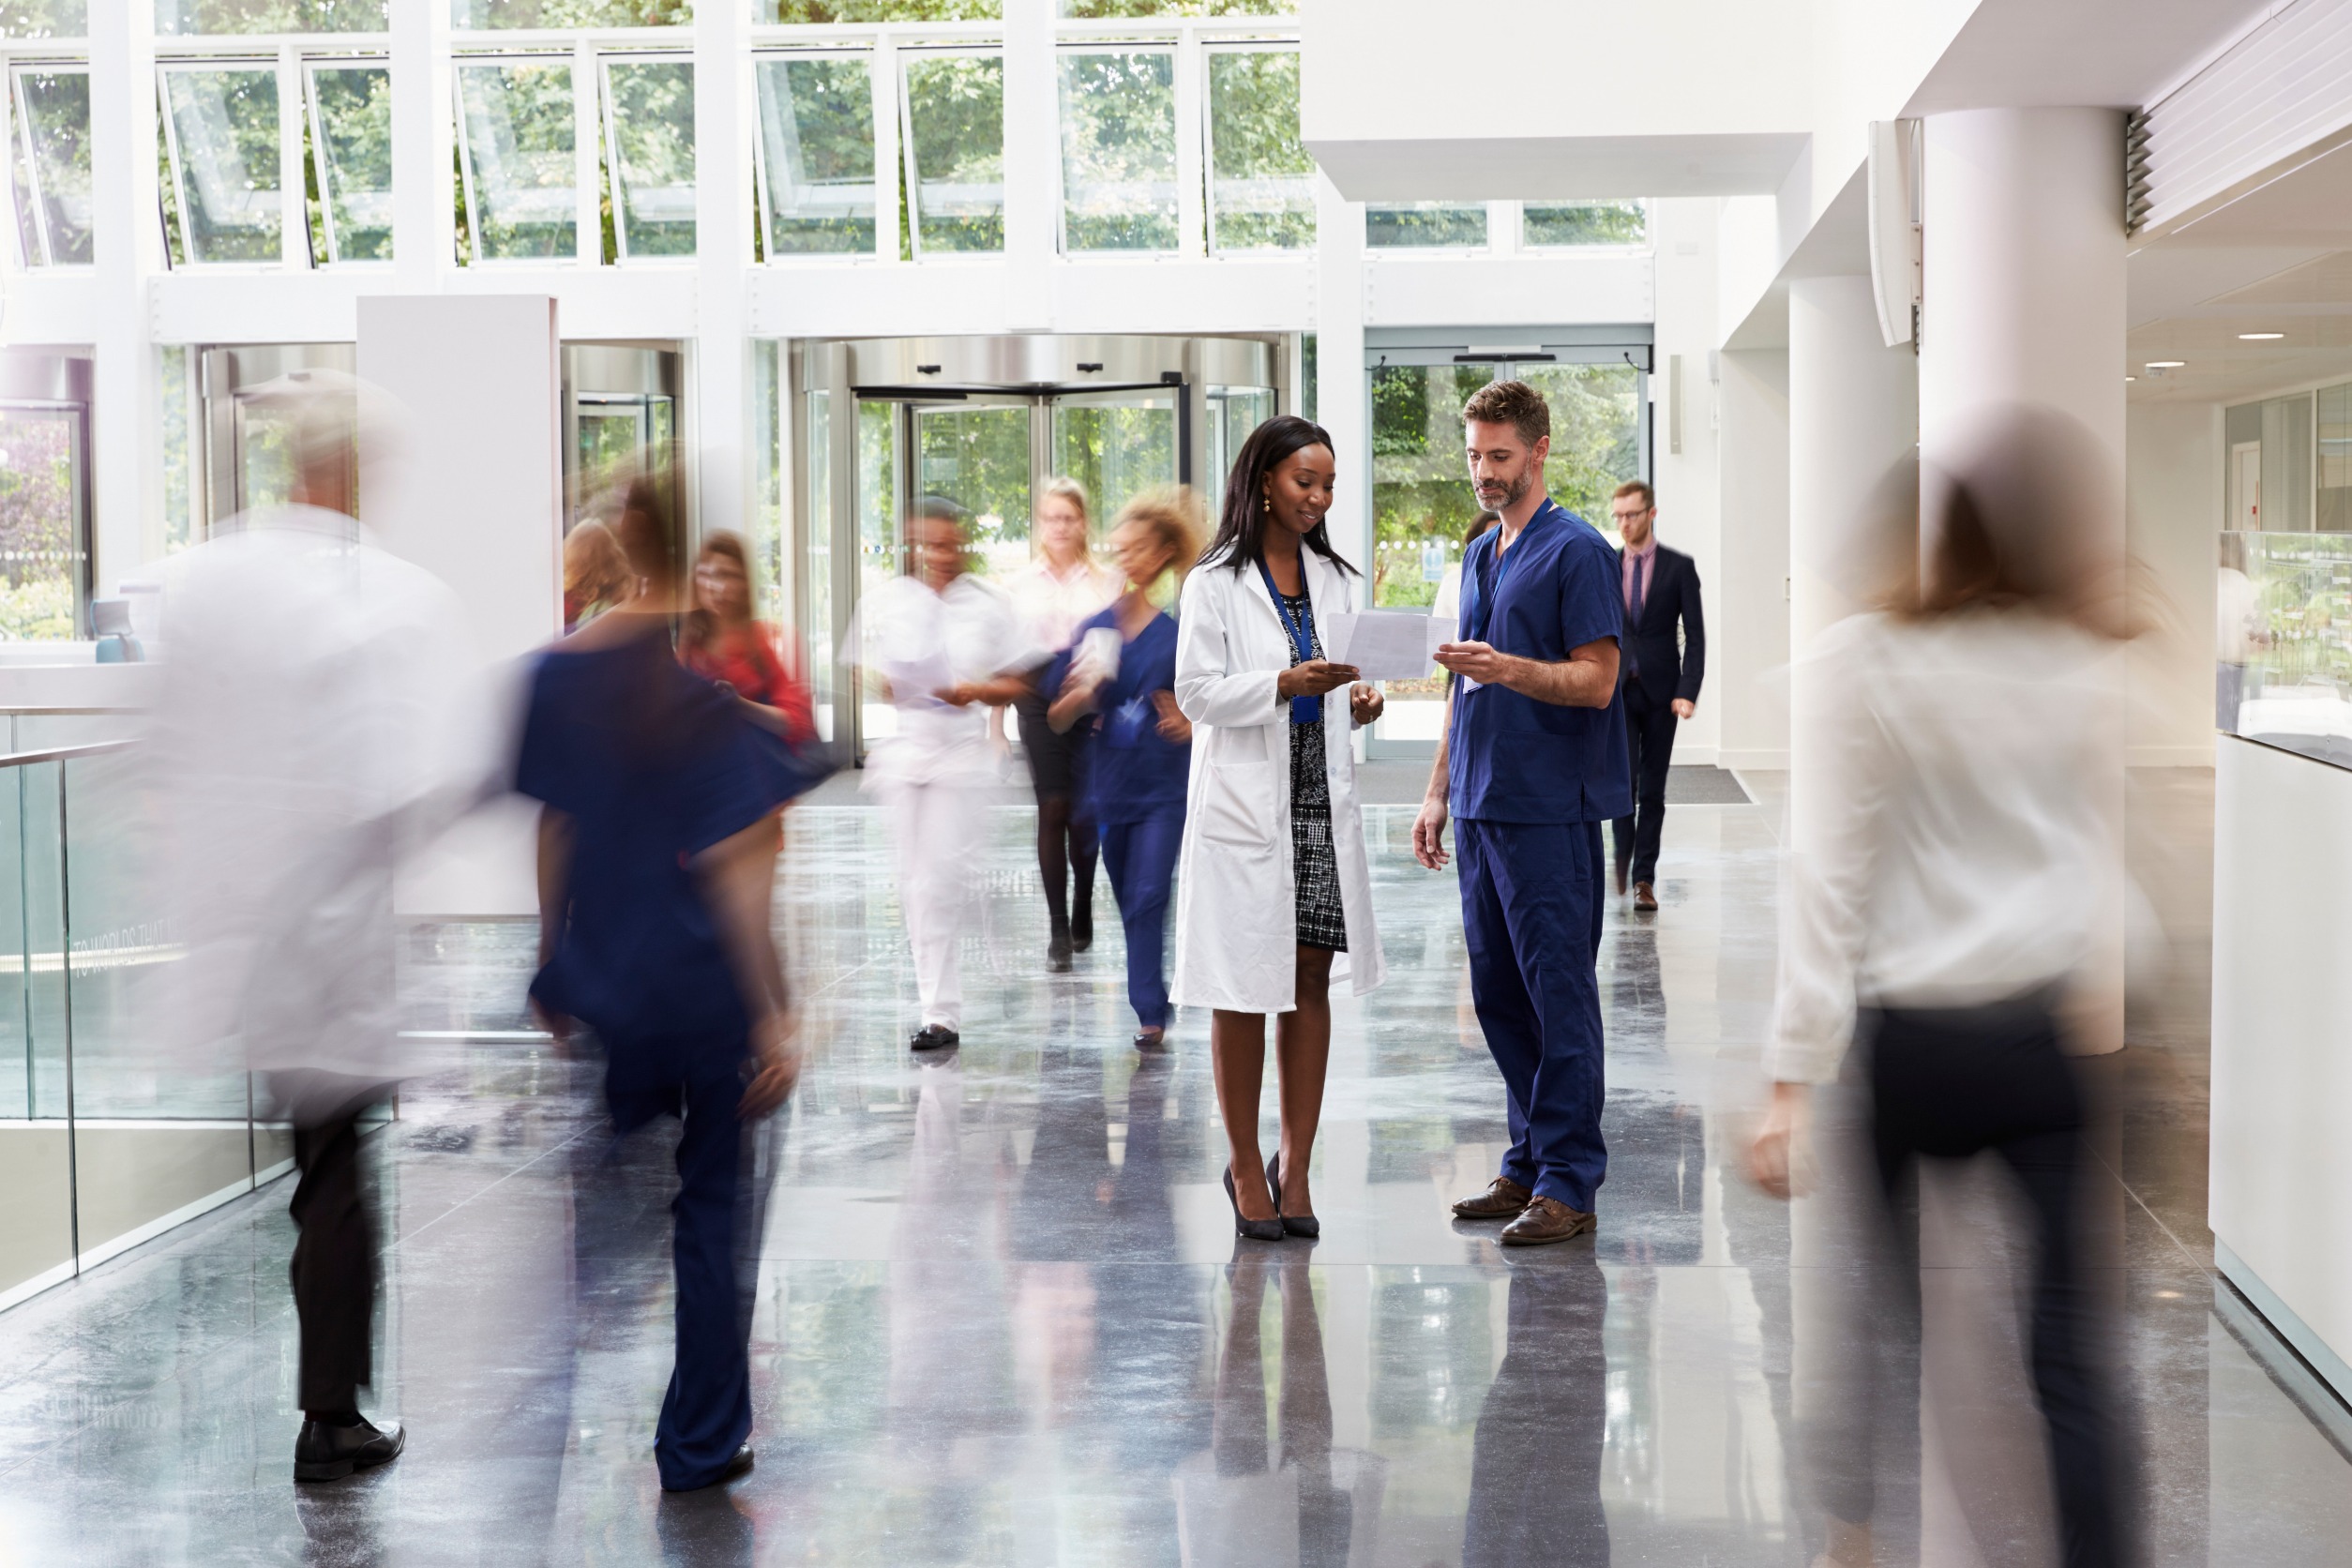 Why Diversity is Critical to Both Recruiting and Patient Outcomes